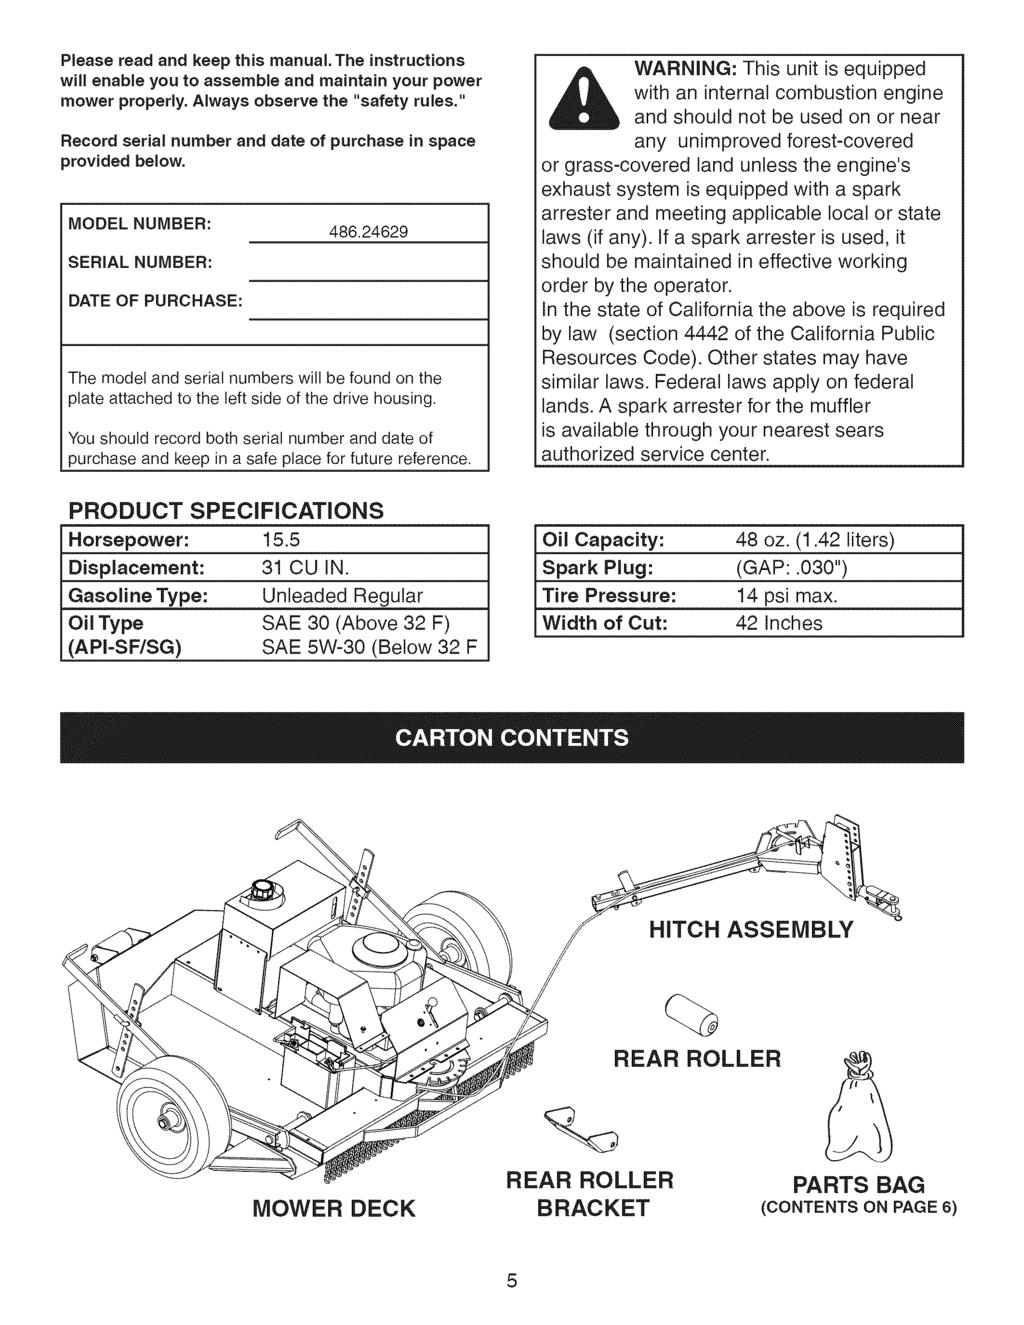 PJease read and keep this manual. The instructions will enabje you to assembje and maintain your power mower properly. AJways observe the "safety rules.